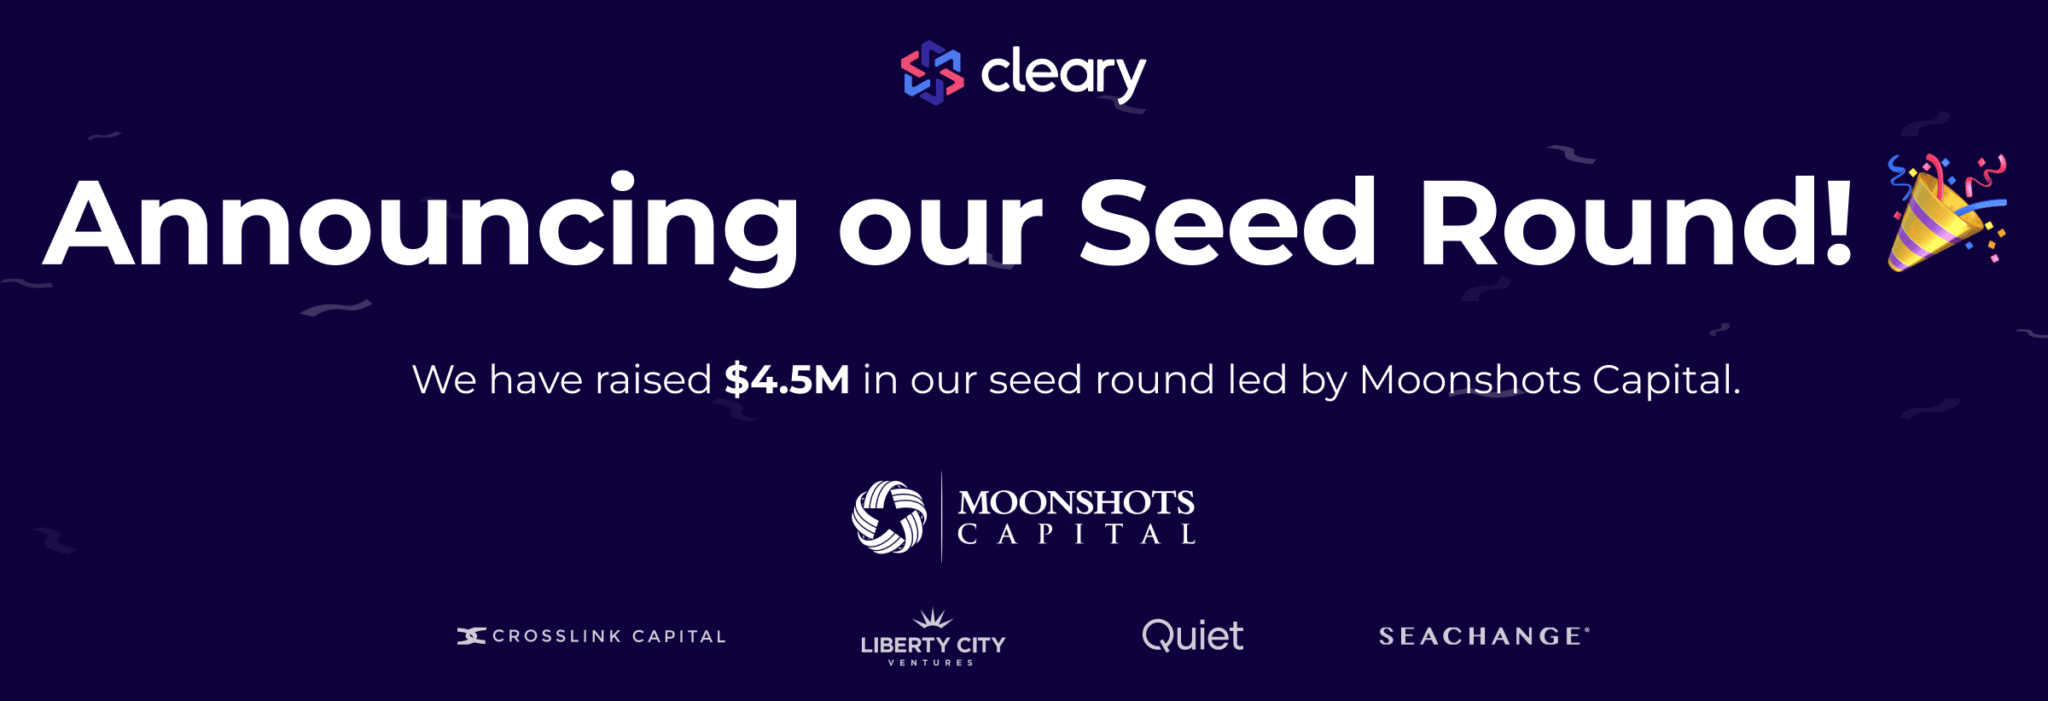 Cleary's Seed Round